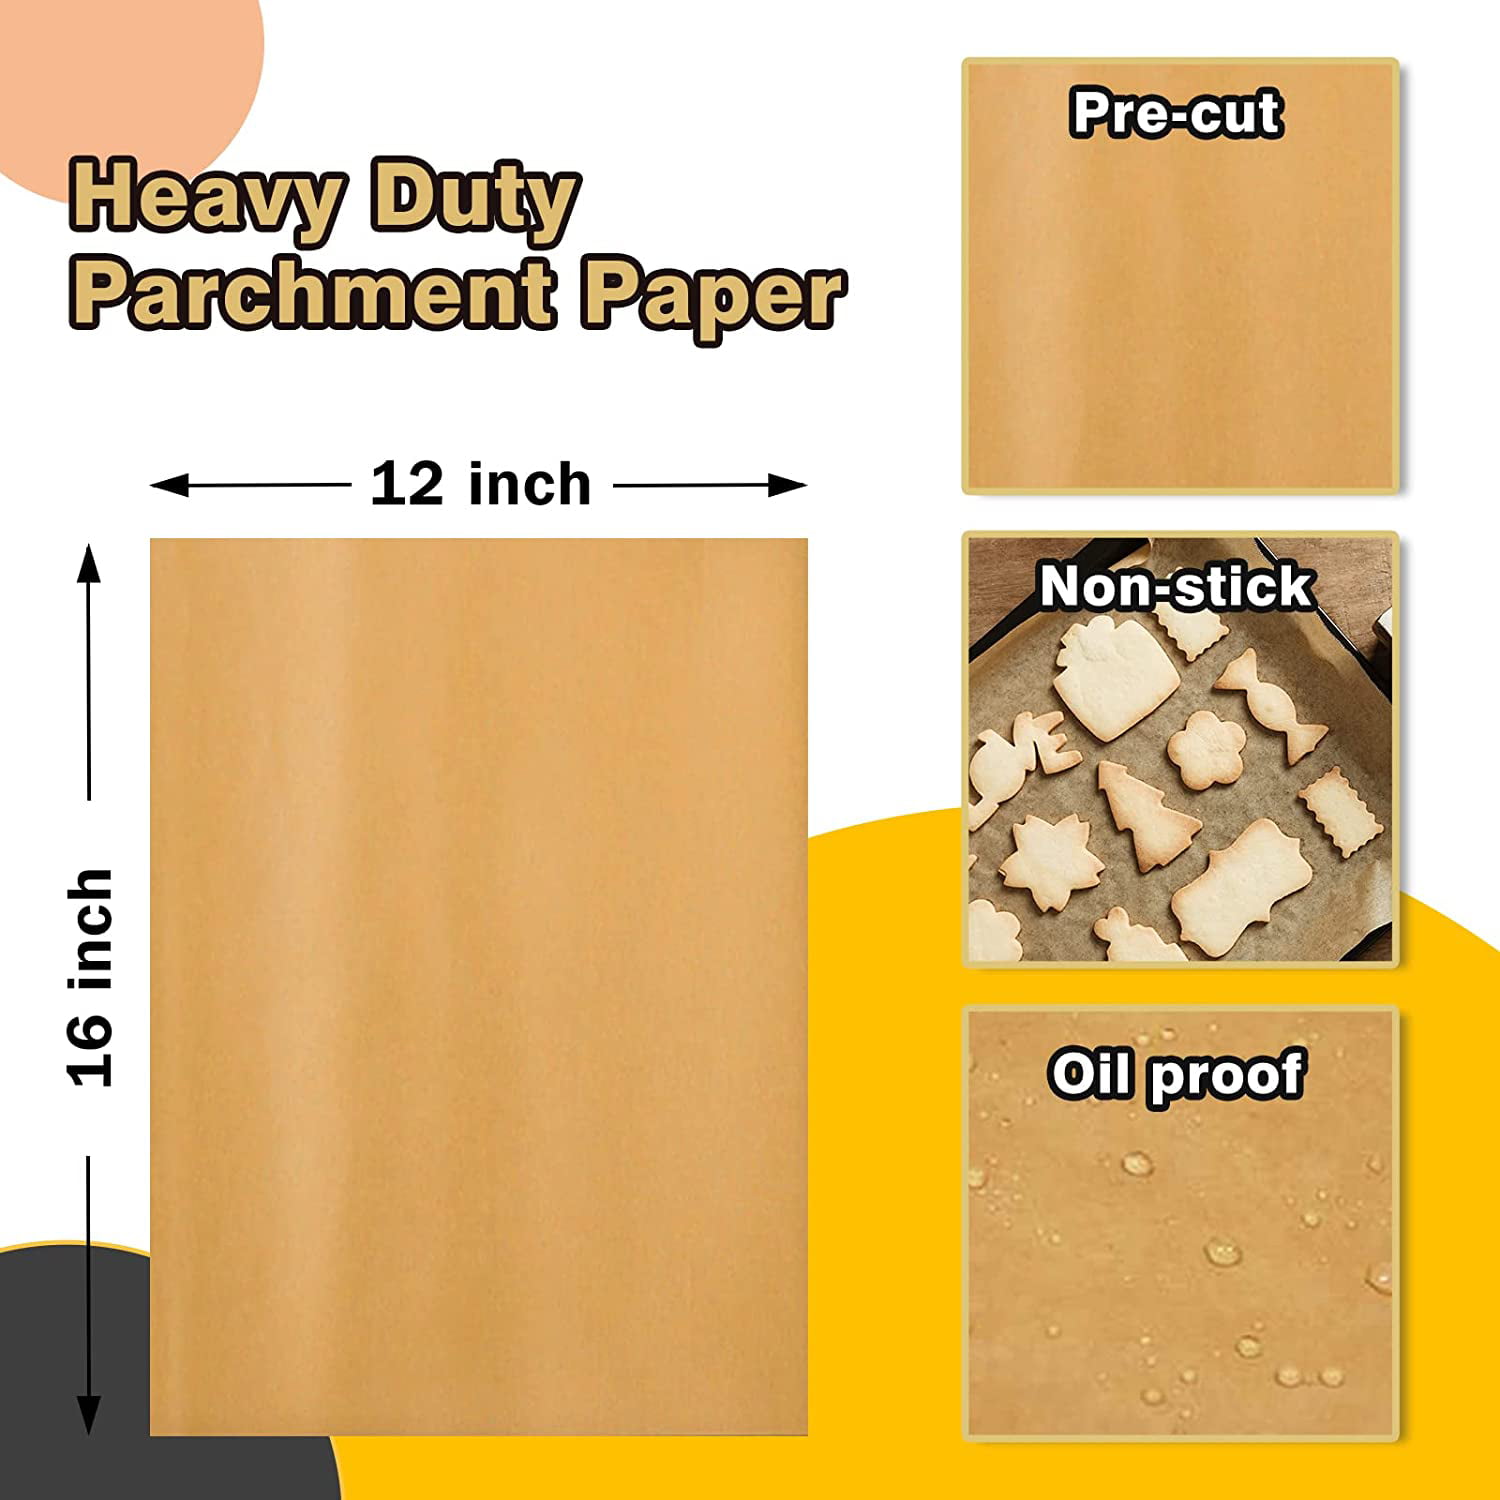 .com: Kootek 50 Pcs Parchment Paper Baking Sheets, 12 x 16 Inch  Heavy-duty Baking Paper Pre-cut Unbleached Bakery Paper for Cooking, Baking,  Steaming, Air Fryer, Grilling, Roasting, Cookies (White): Home & Kitchen